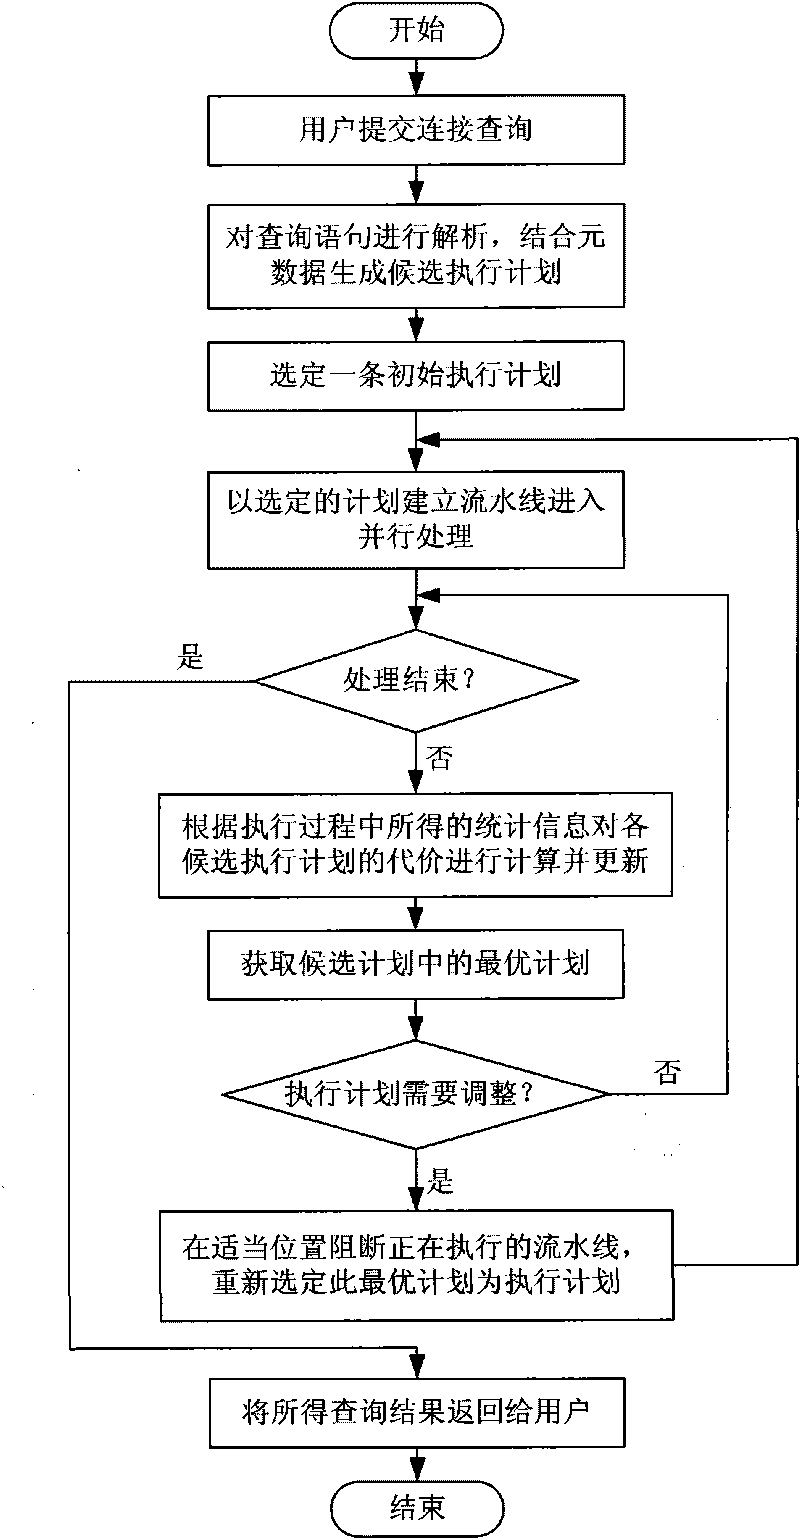 Joint query adaptive processing method for grid database